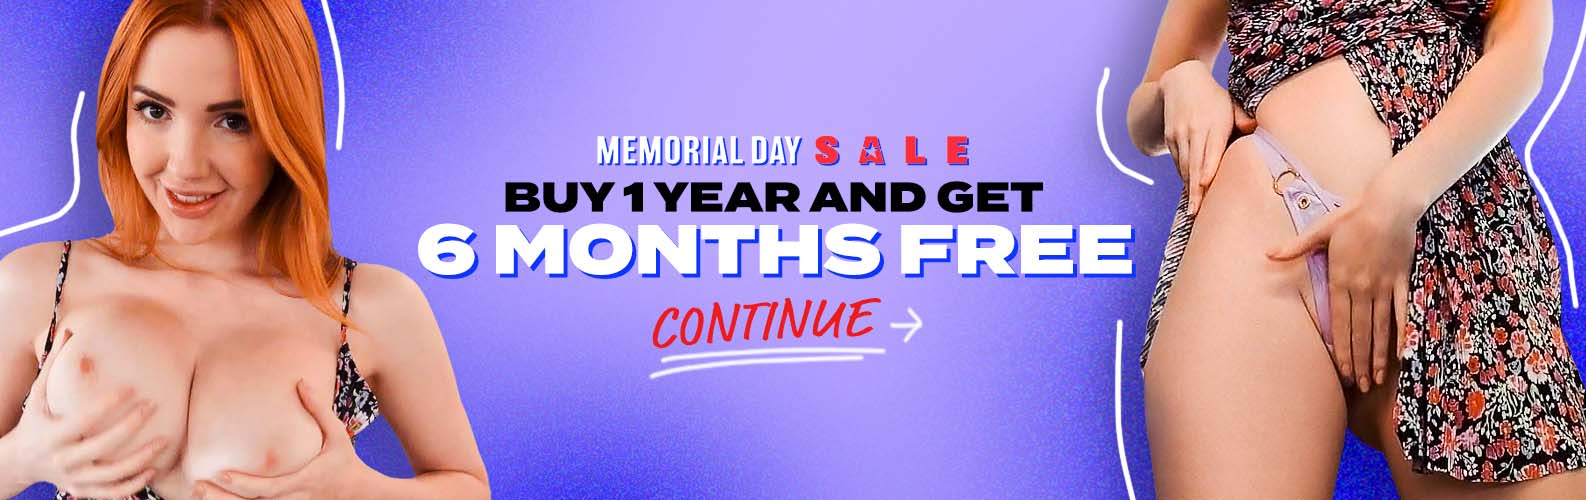 Reality Kings Memorial Day Sale